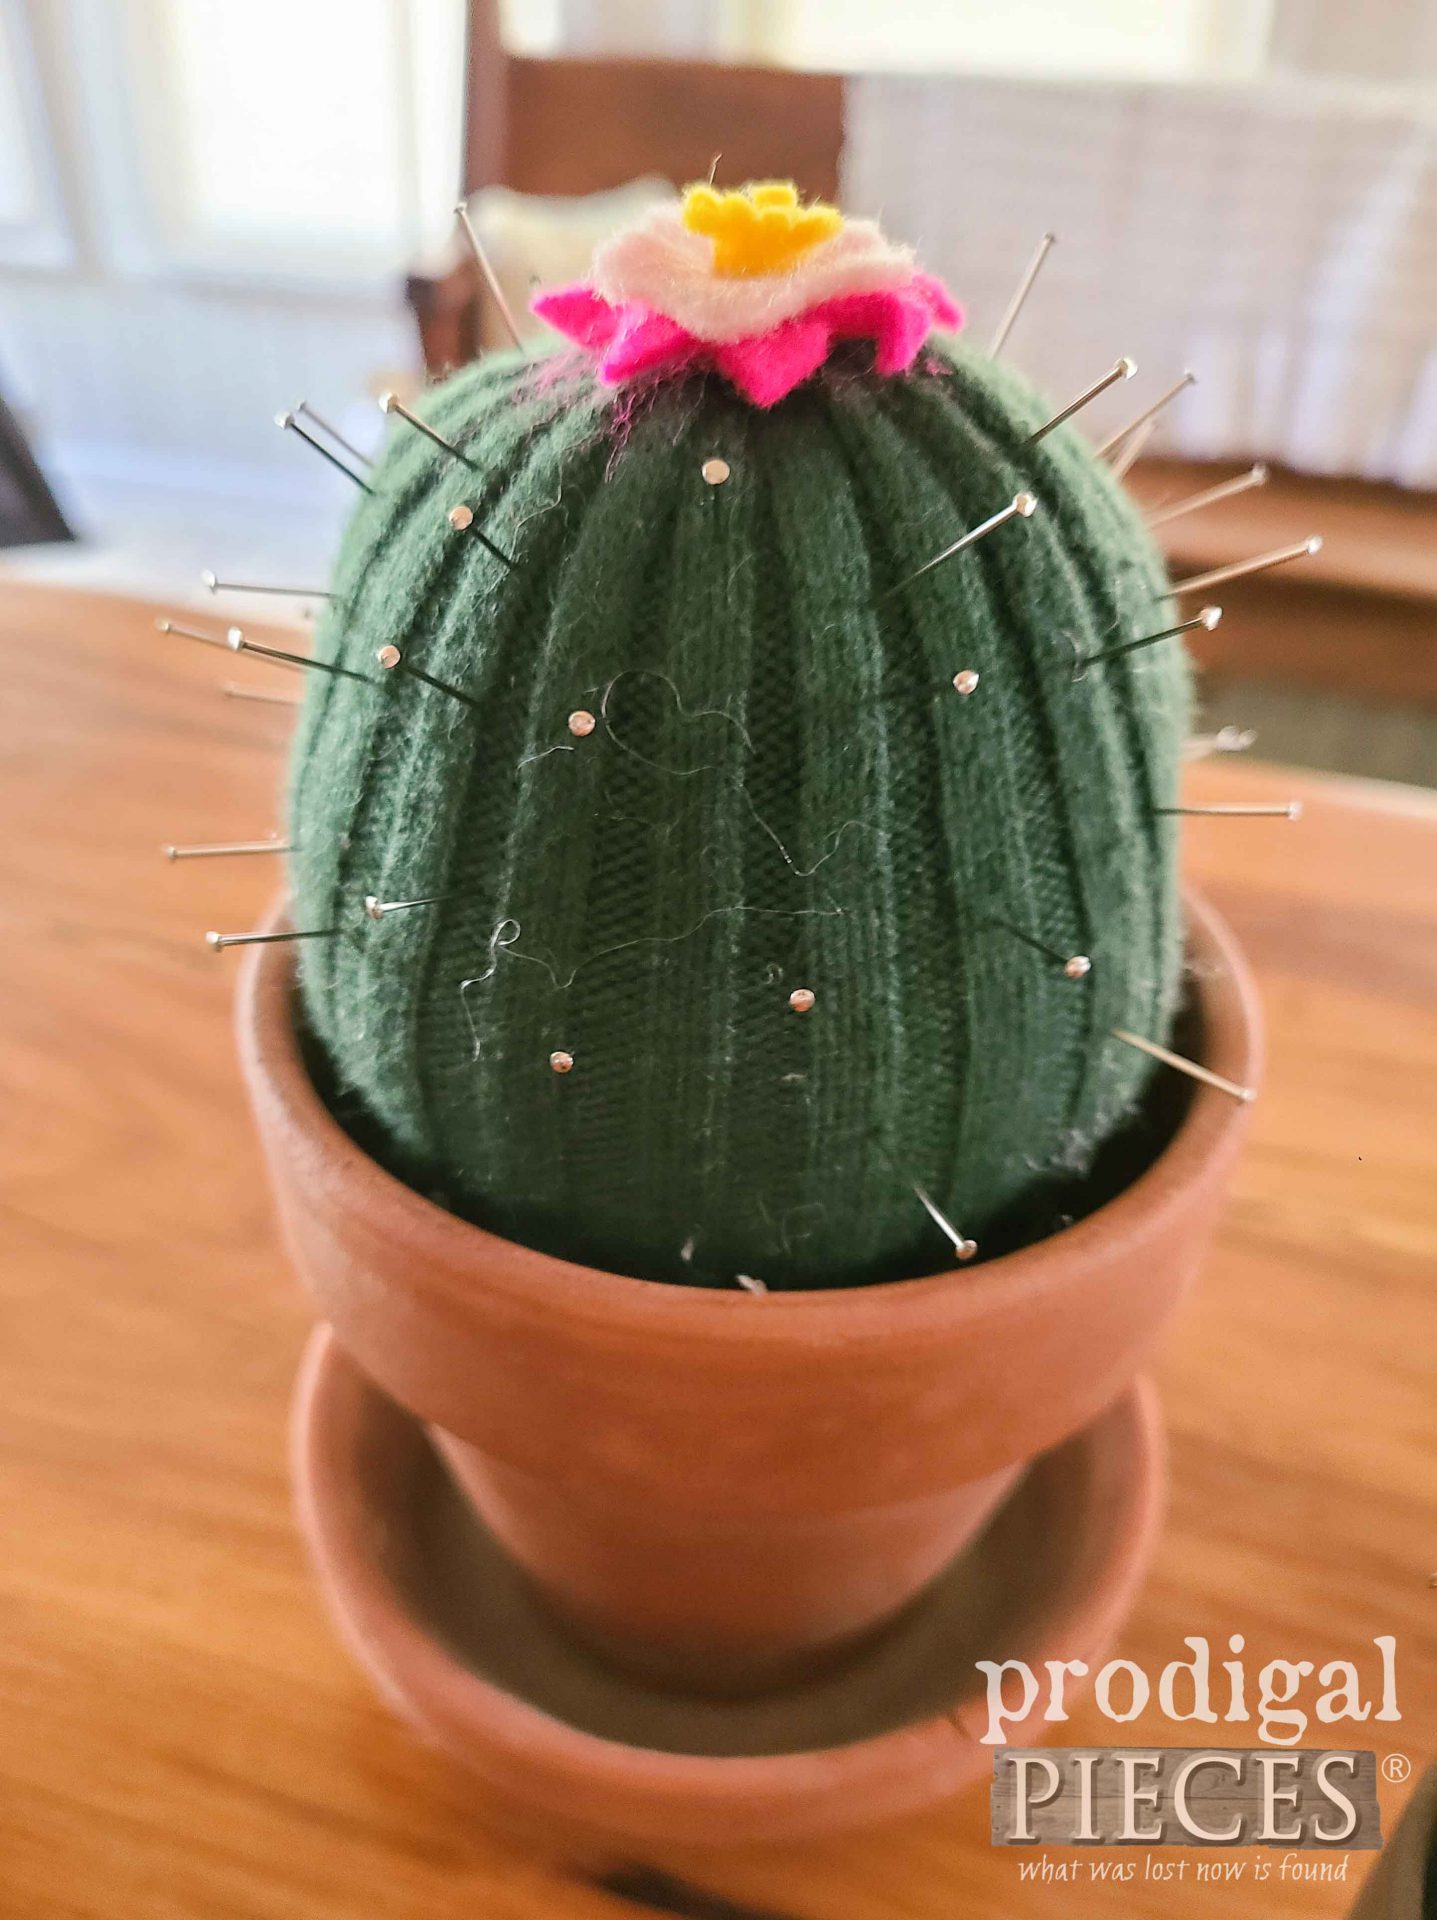 Upcycled Knit Sweater Cactus Pincushion by Larissa of Prodigal Pieces | prodigalpieces.com #prodigalpieces #handmade #home #crafts #giftidea